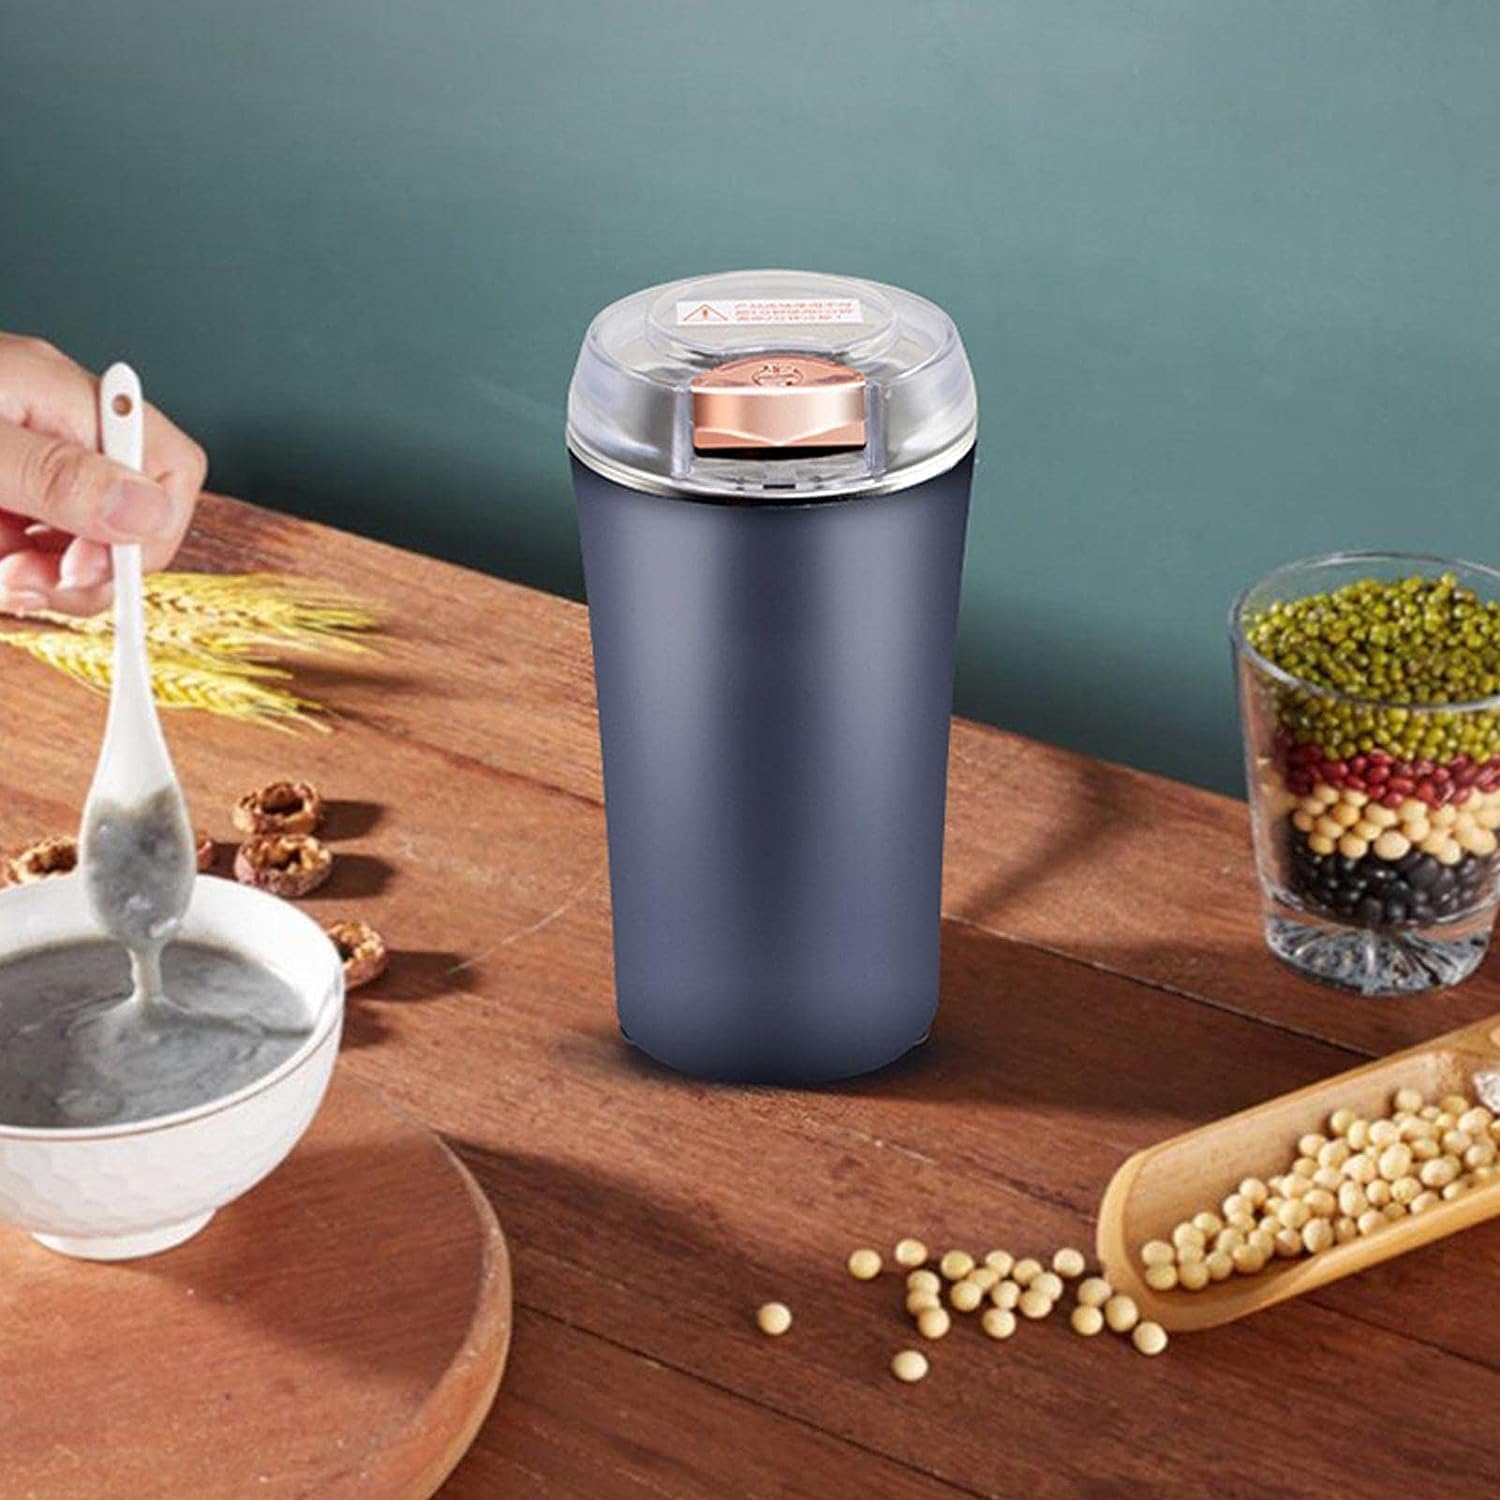 Protable Electric Coffee Grinder for Grinding Dry Herbs, Coffee, Stainless Steel Herbs Spices Nuts Grain Coffee Grinder for Home.